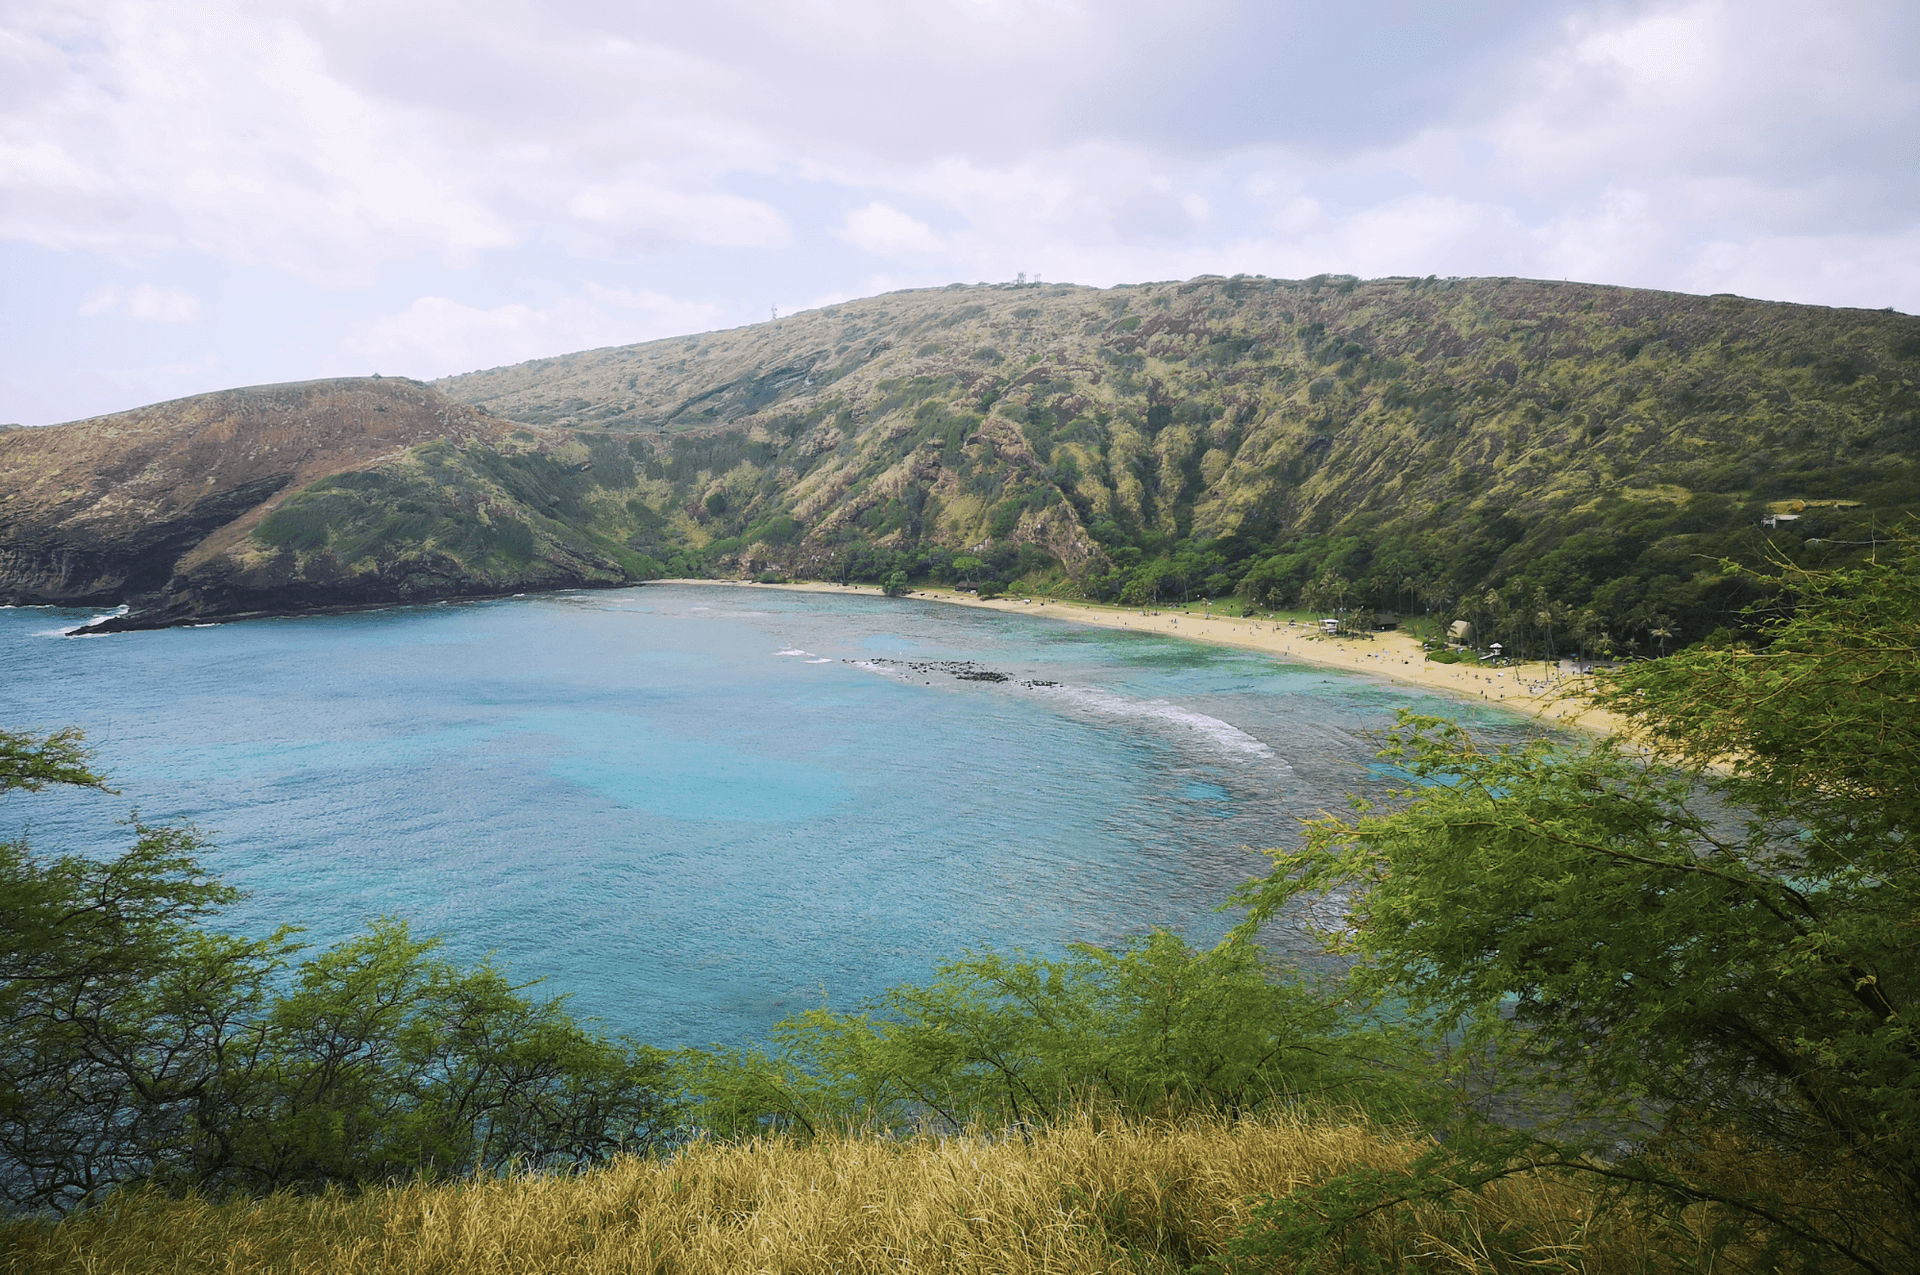 Our first view of Hanauma Bay - the stunning curved beach and coral reef area known for its rich natural life.